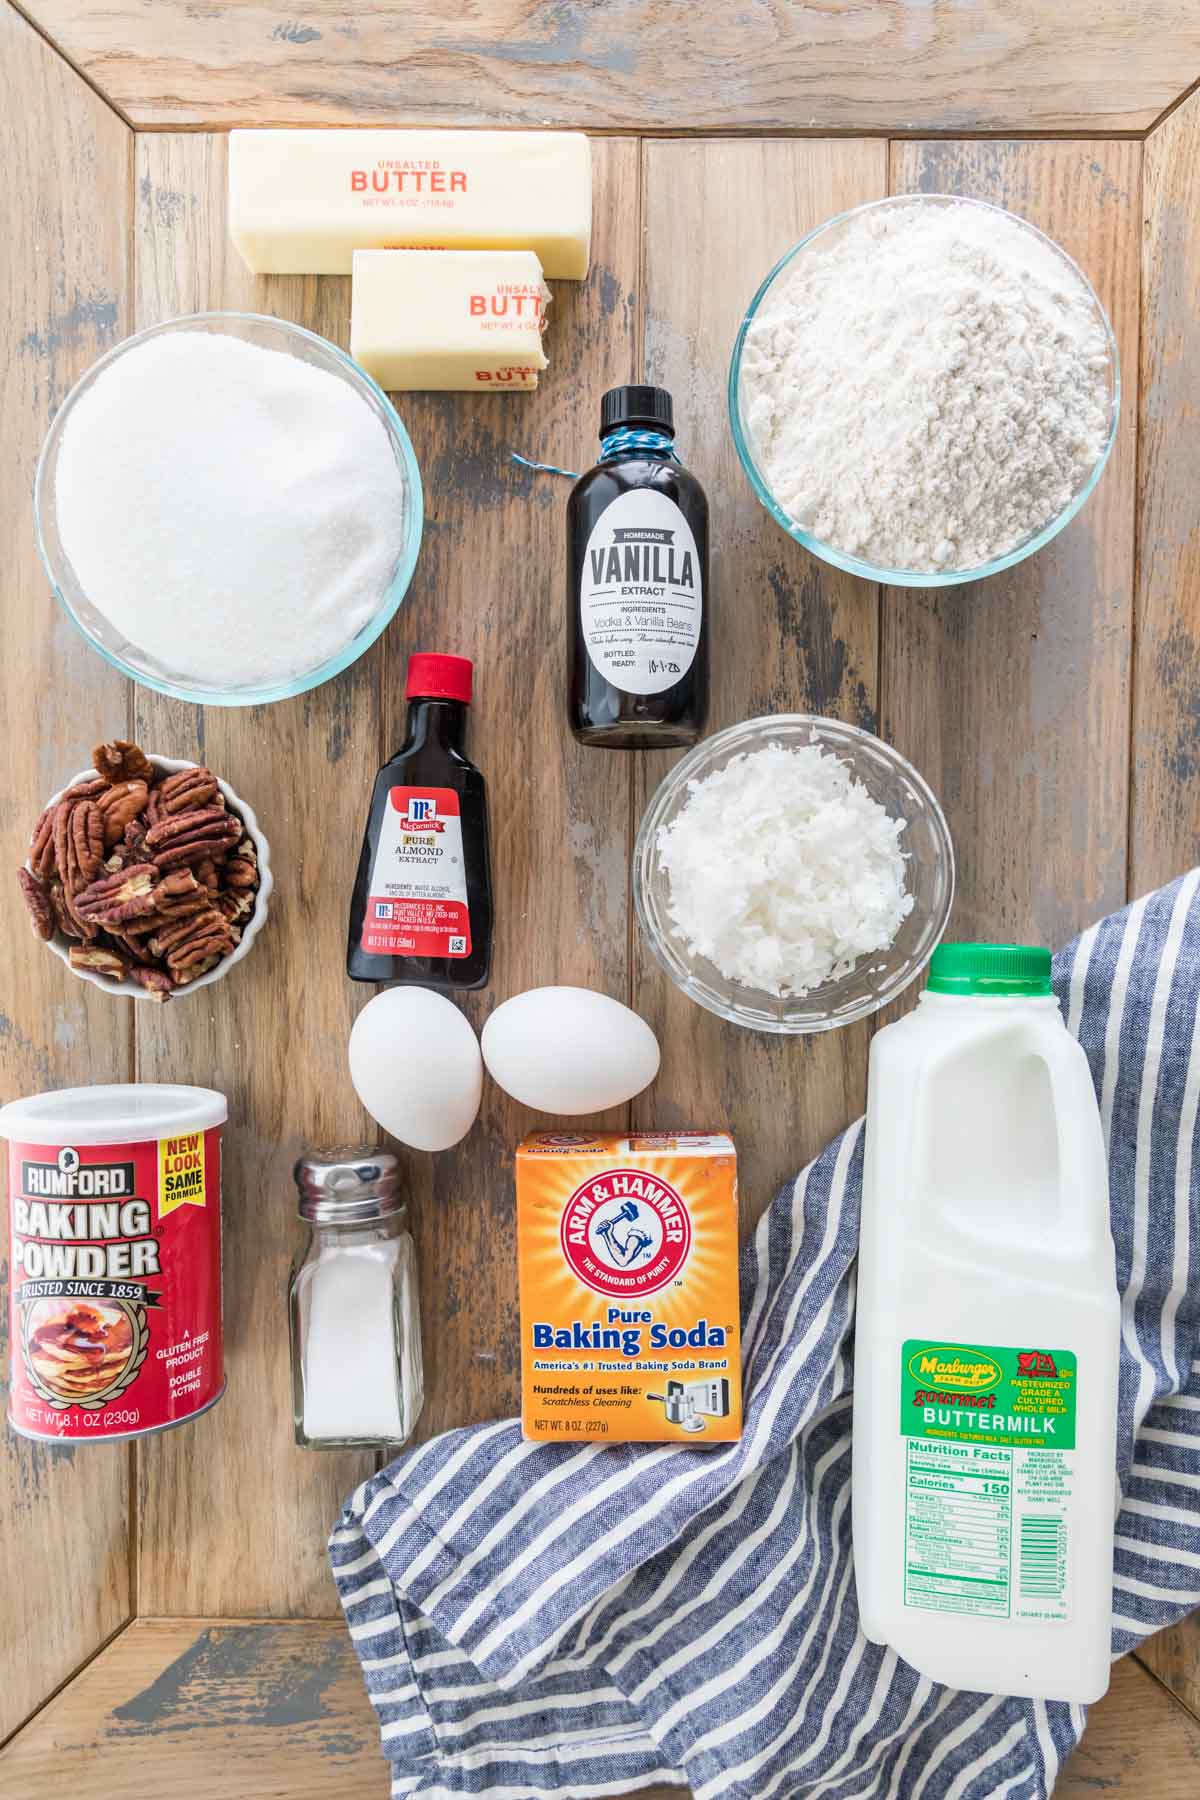 top-down view of ingredients including coconut, pecans, buttermilk, flour, and more